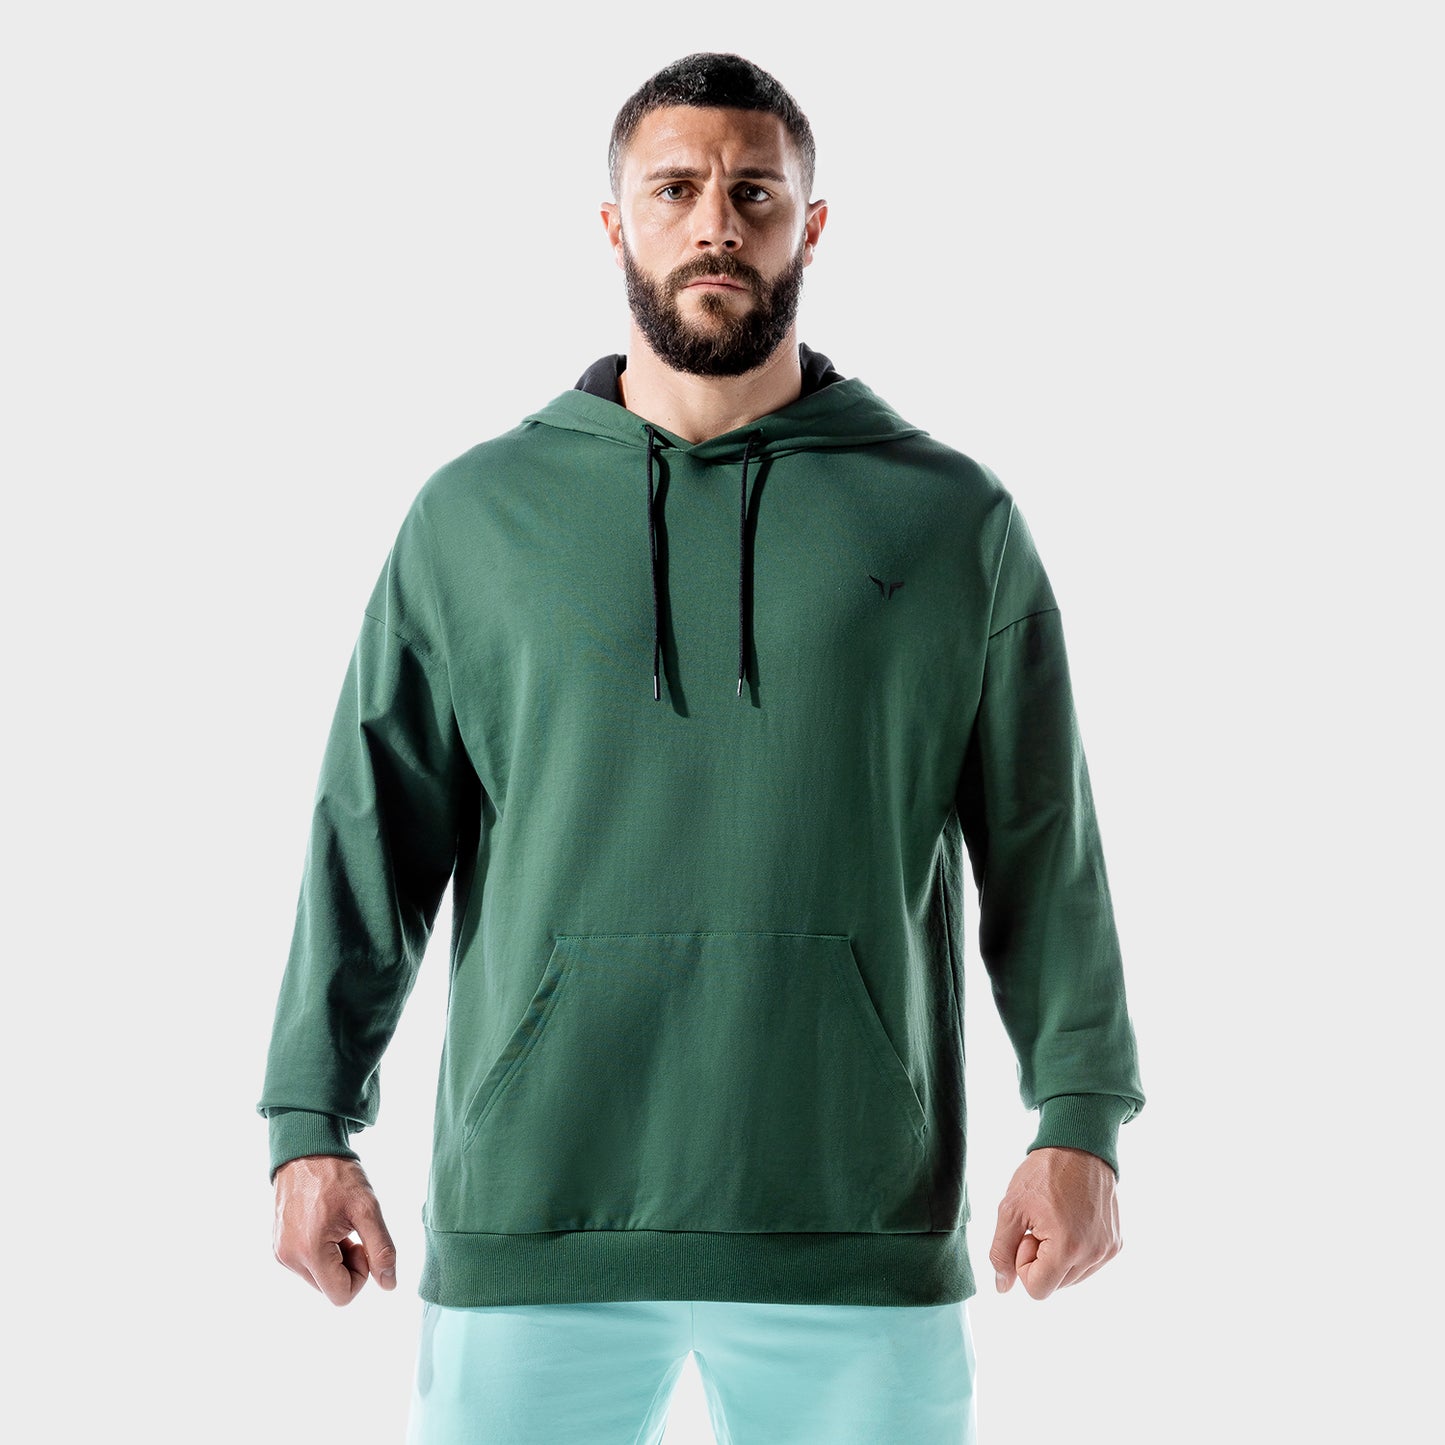 squatwolf-gym-wear-lab-360-hoodie-green-workout-hoodies-for-men